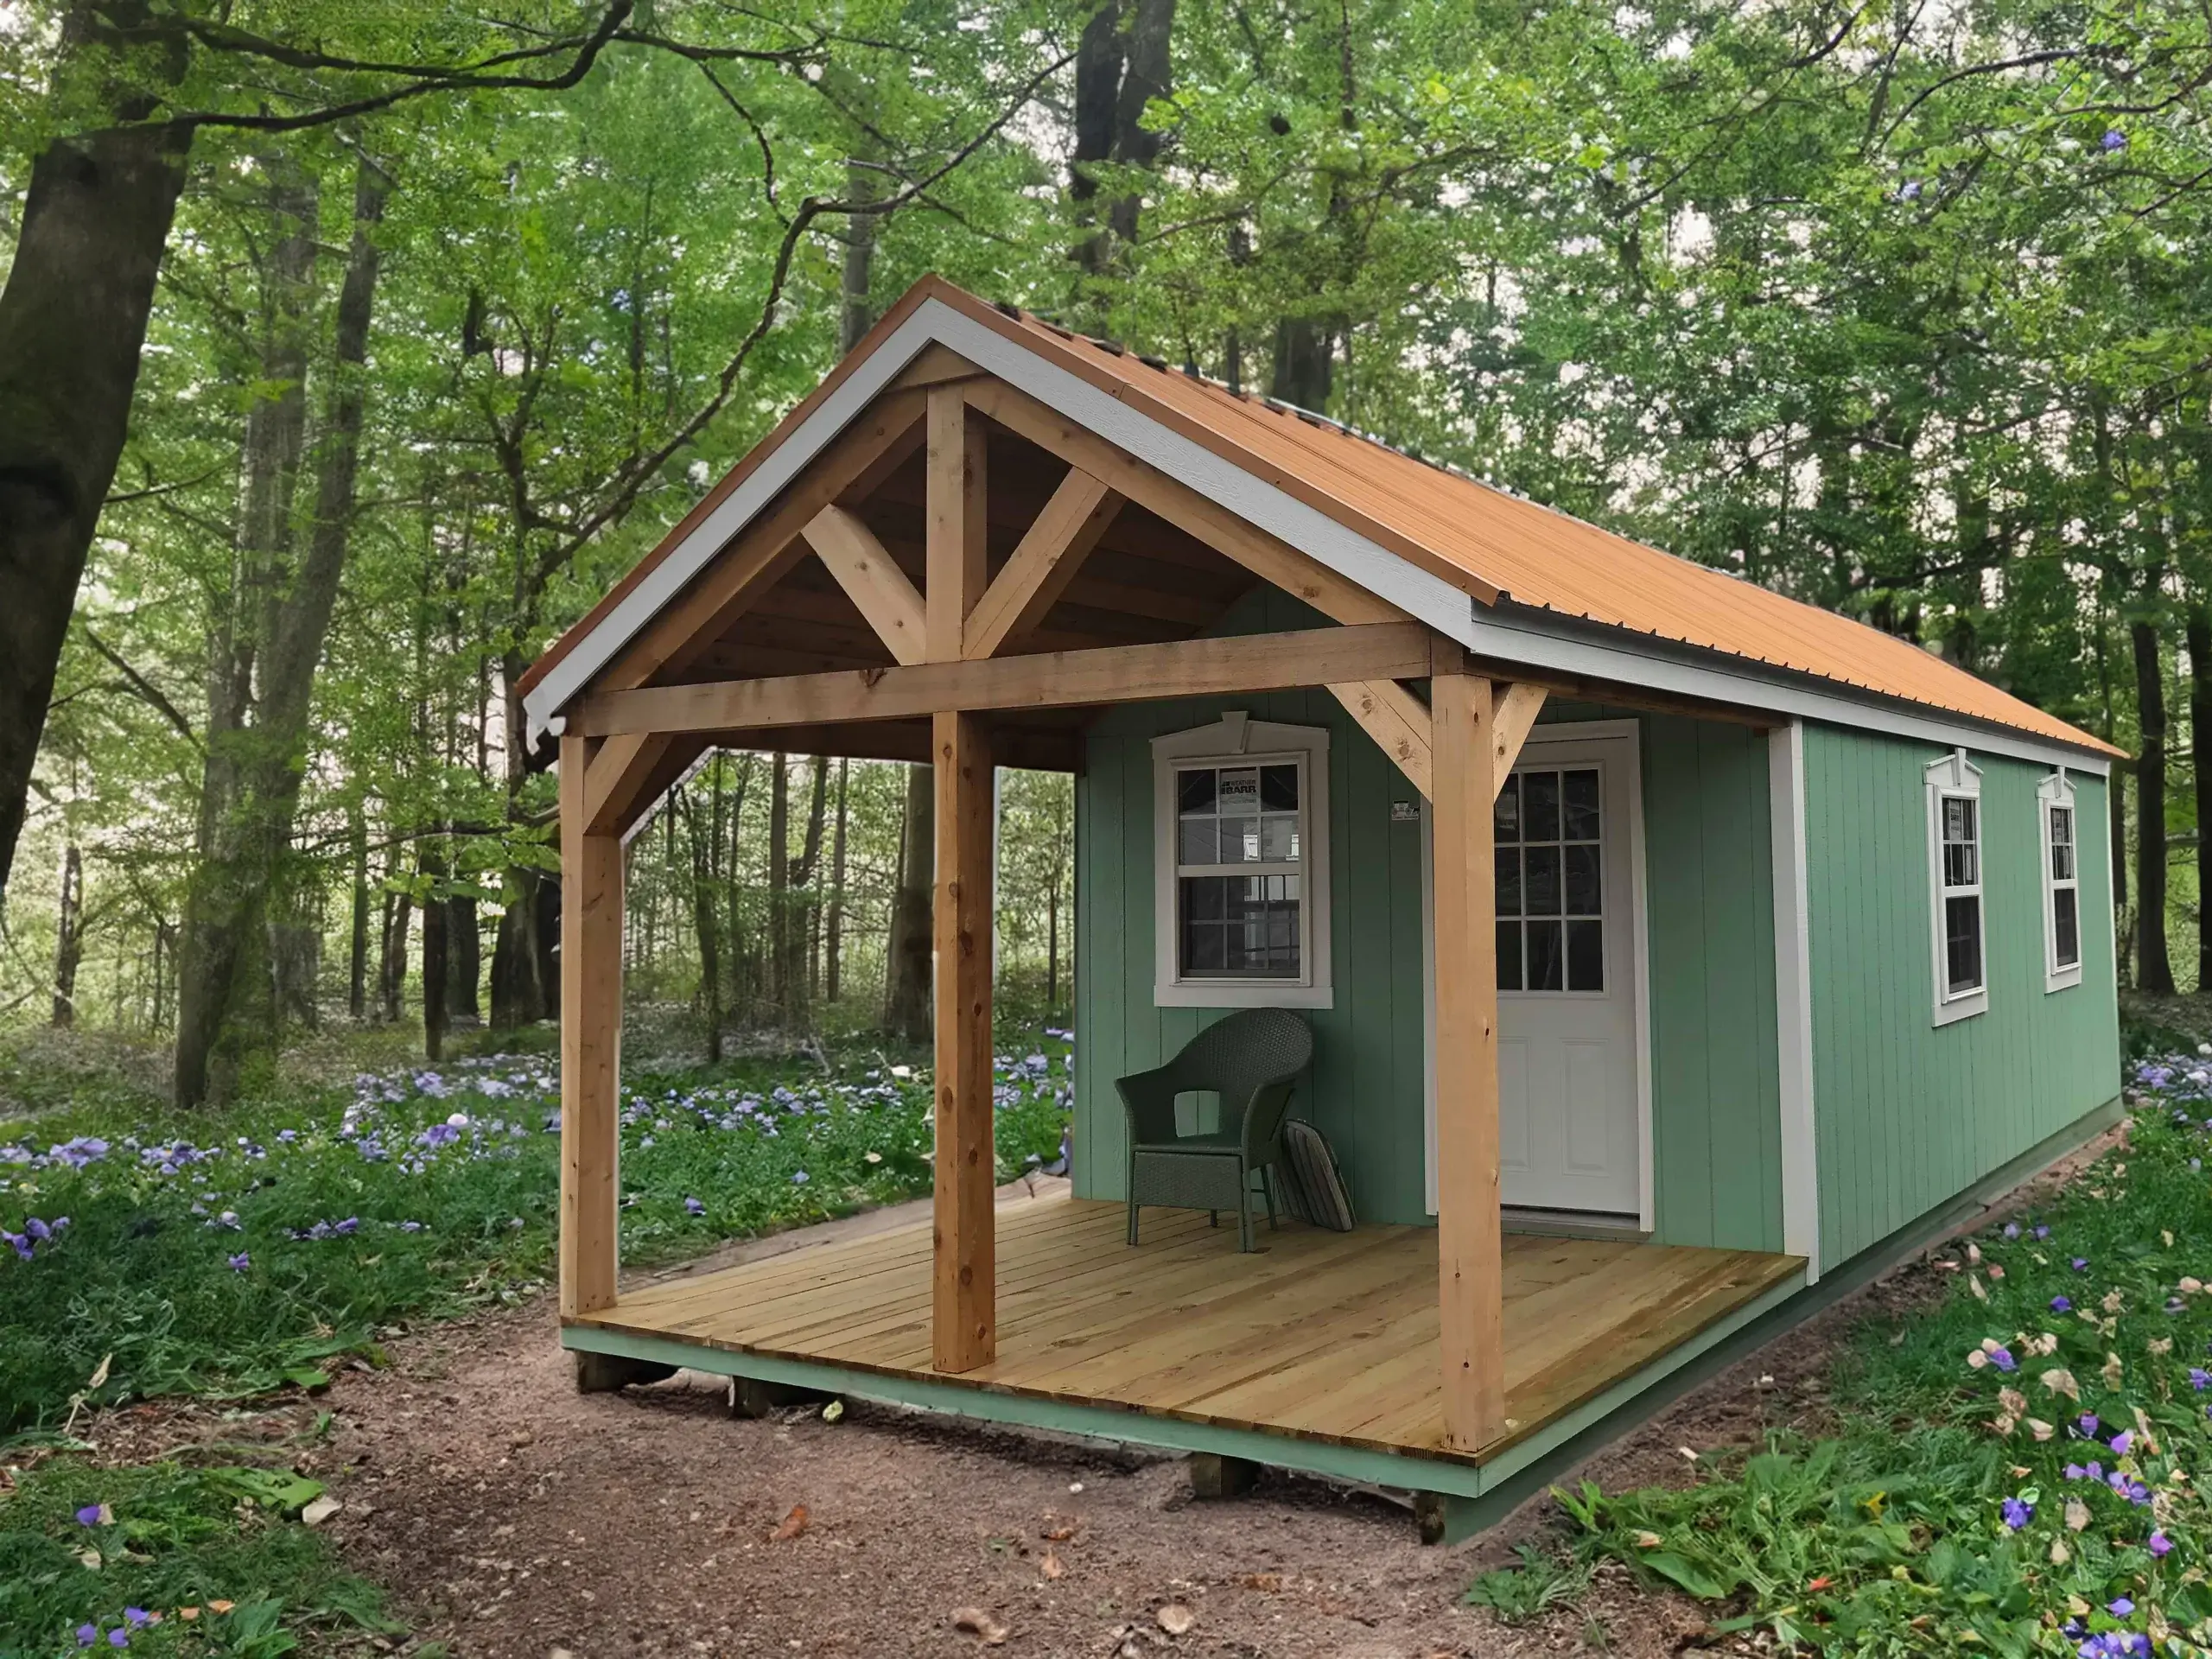 Shed Homes for Sale